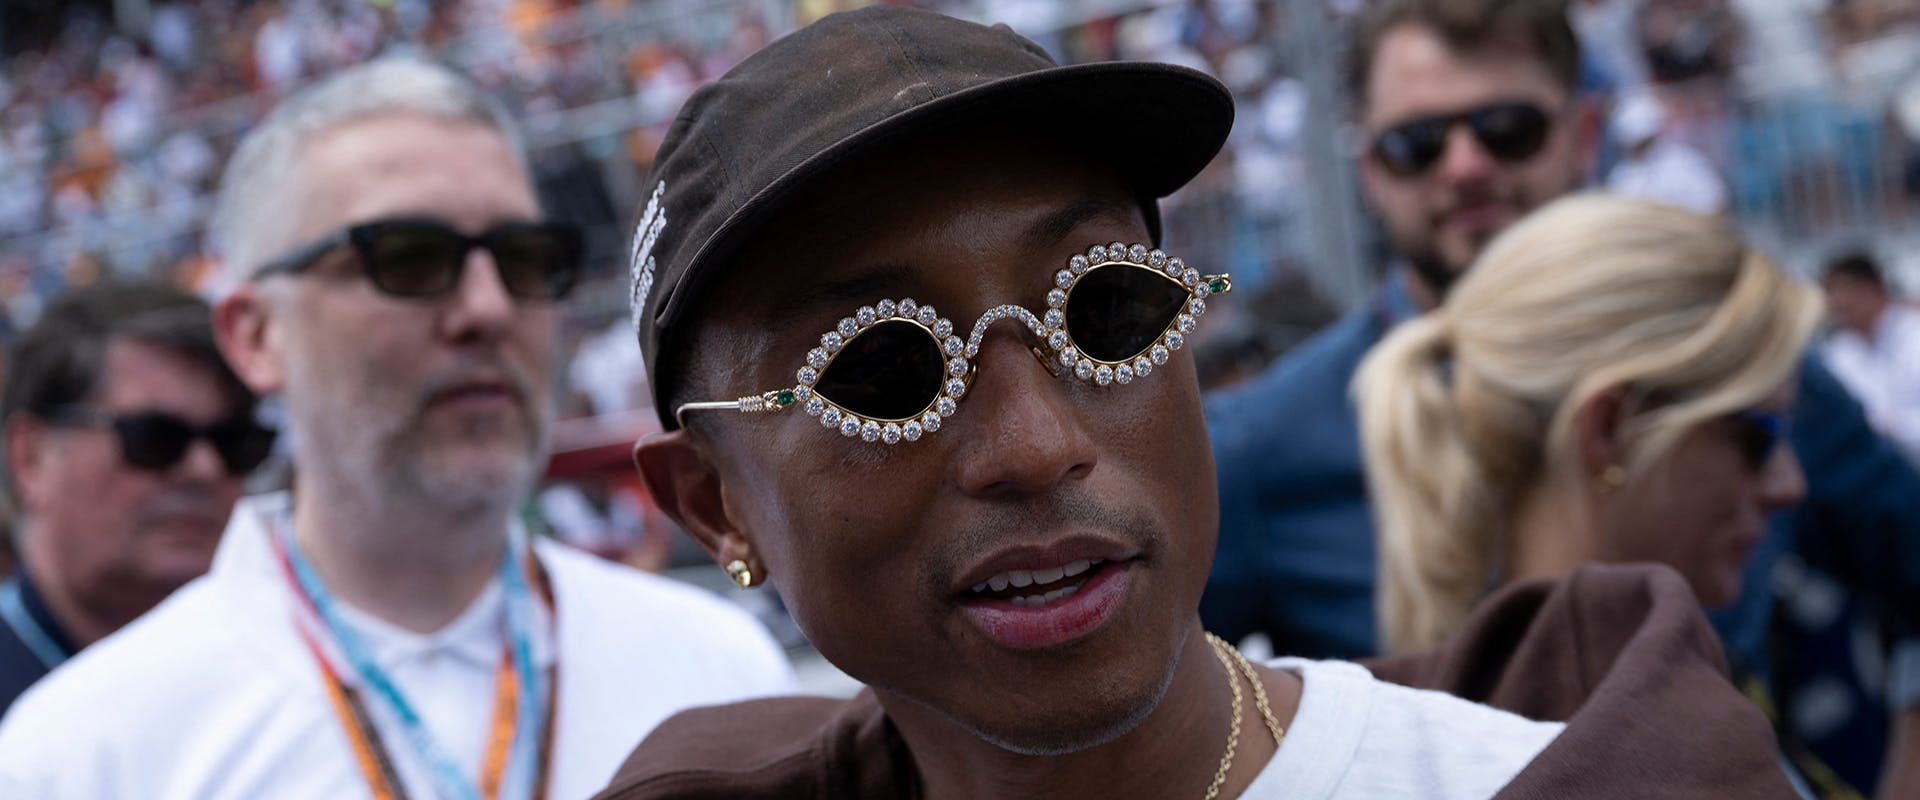 Pharrell Williams walks on the grid before the Miami Grand Prix at the Miami International Autodrome May 8, 2022, in Miami Gardens, Florida. (Photo by Brendan Smialowski / AFP) (Photo by BRENDAN SMIALOWSKI/AFP via Getty Images)